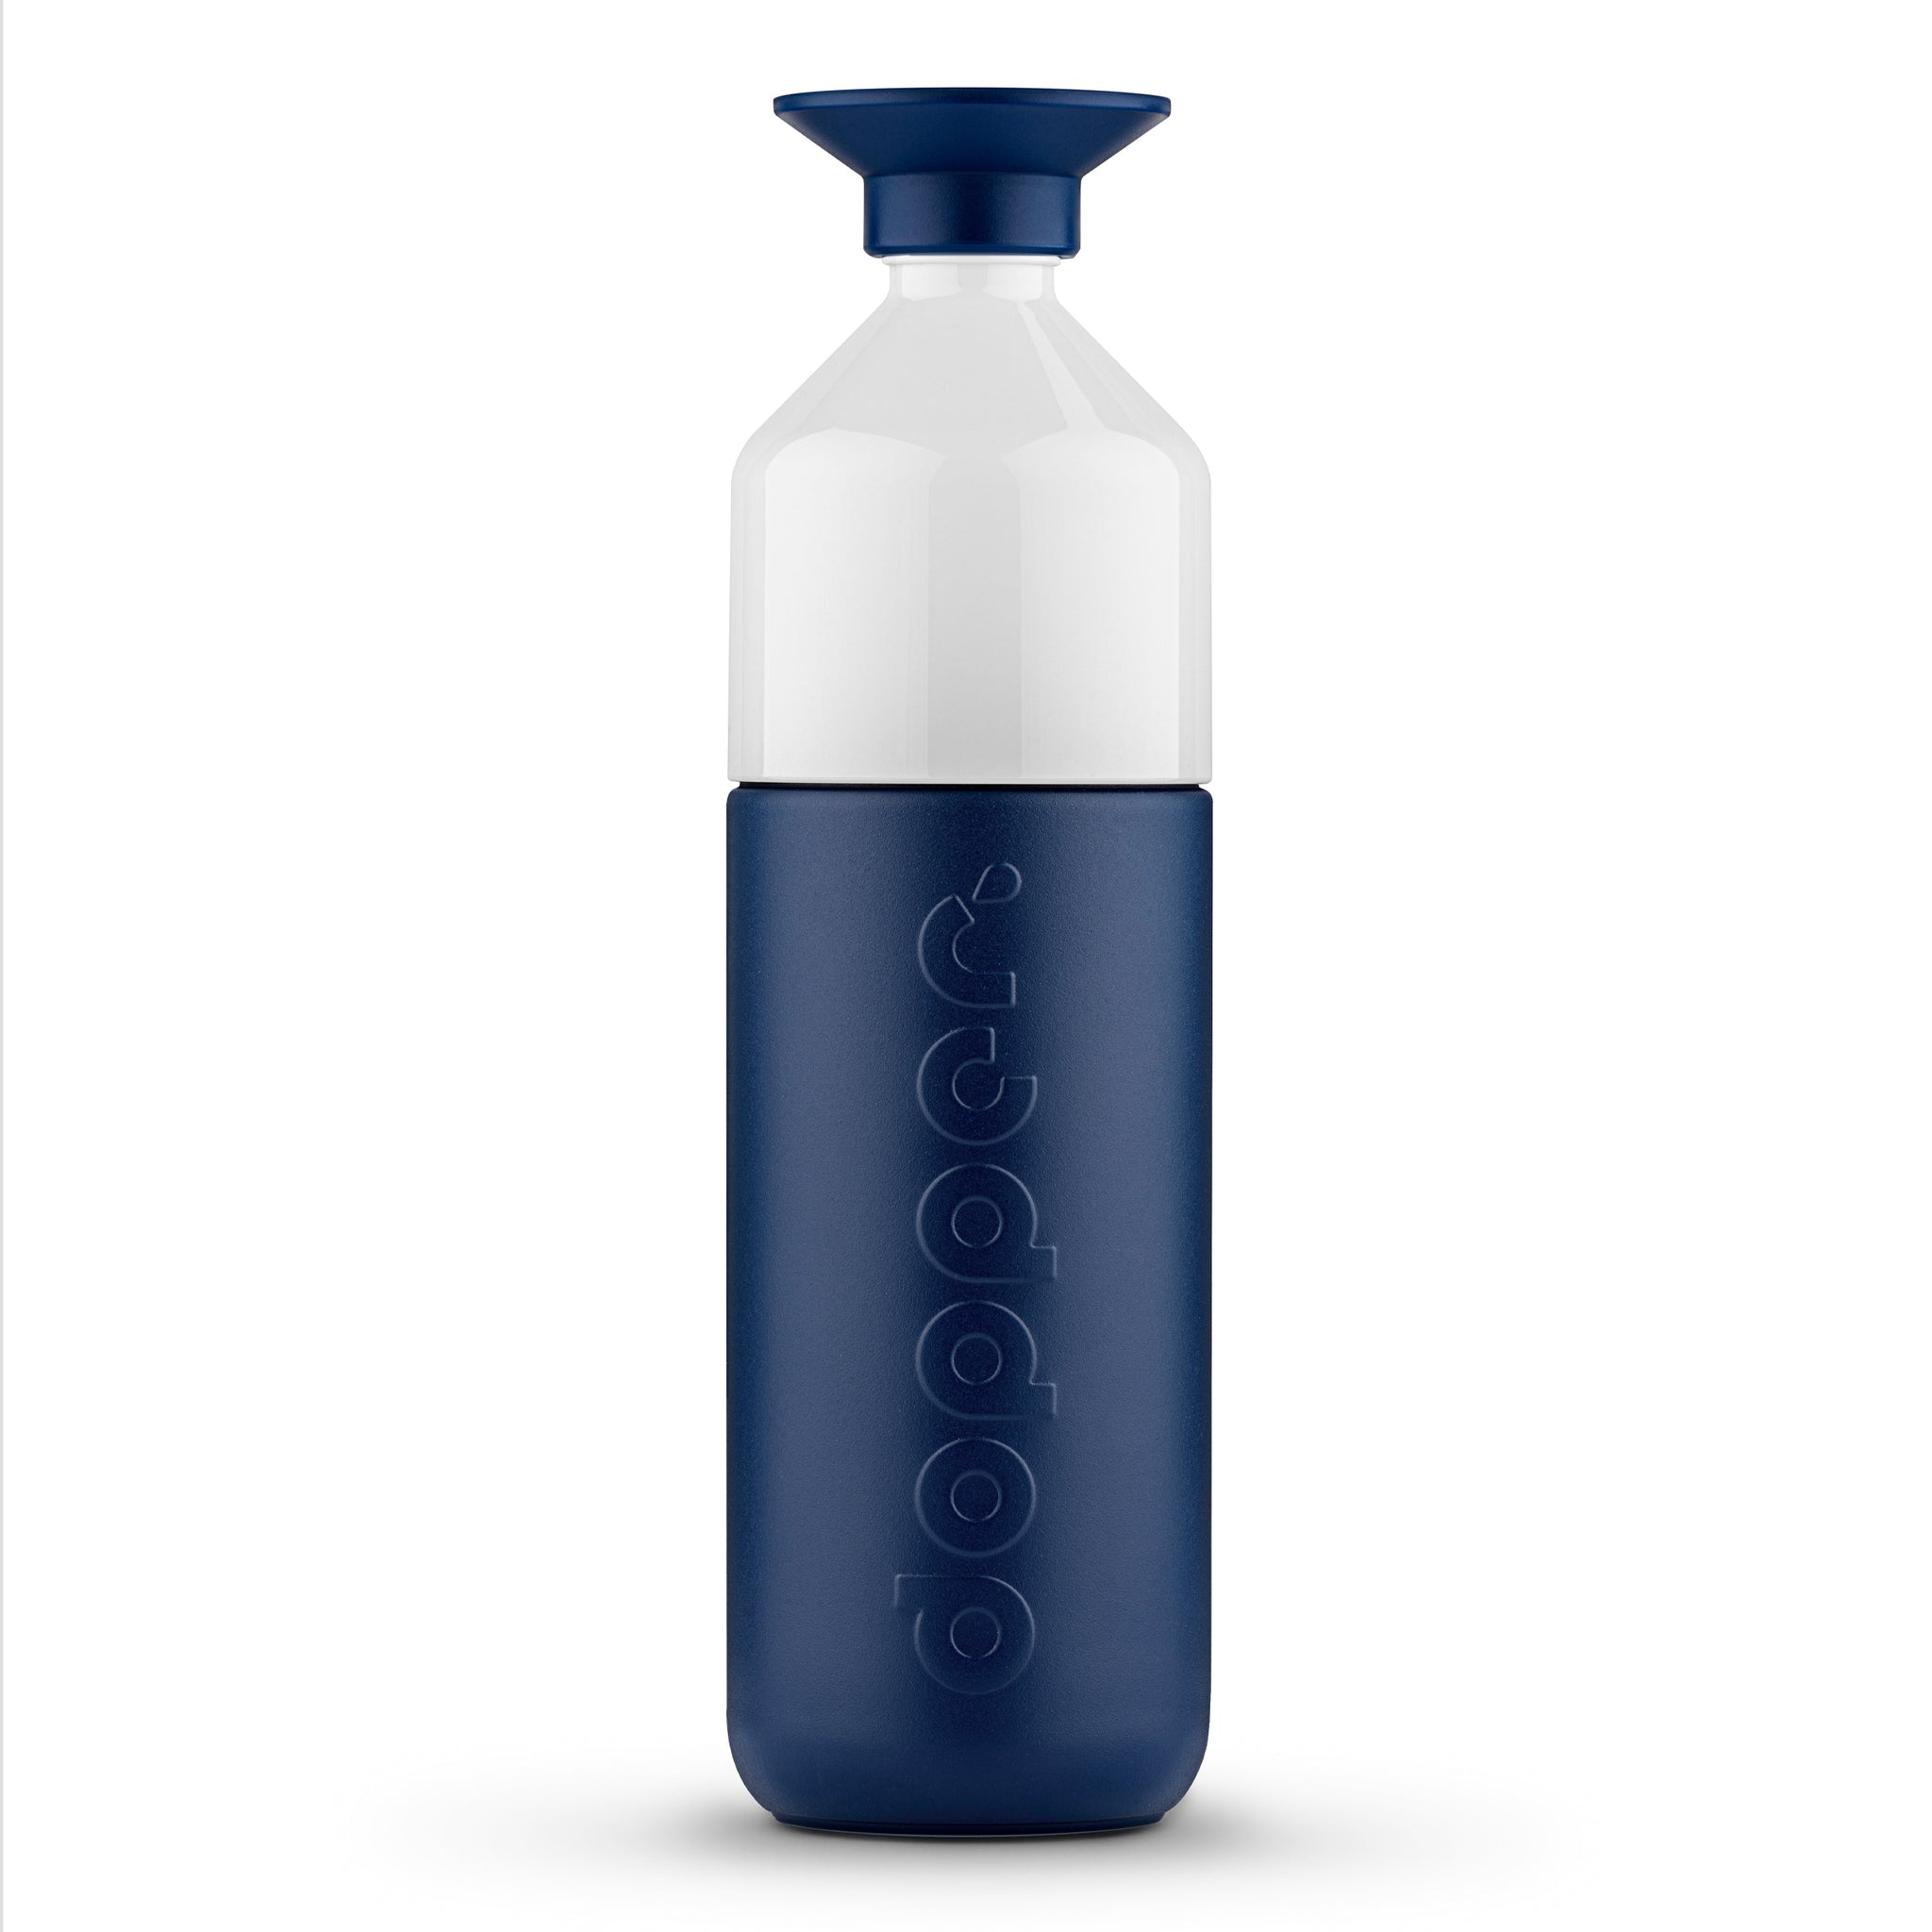 Dopper Insulated X-Large Breaker Blue│Thermosfles 1L│art. 5661│voorkant met witte achtergrond